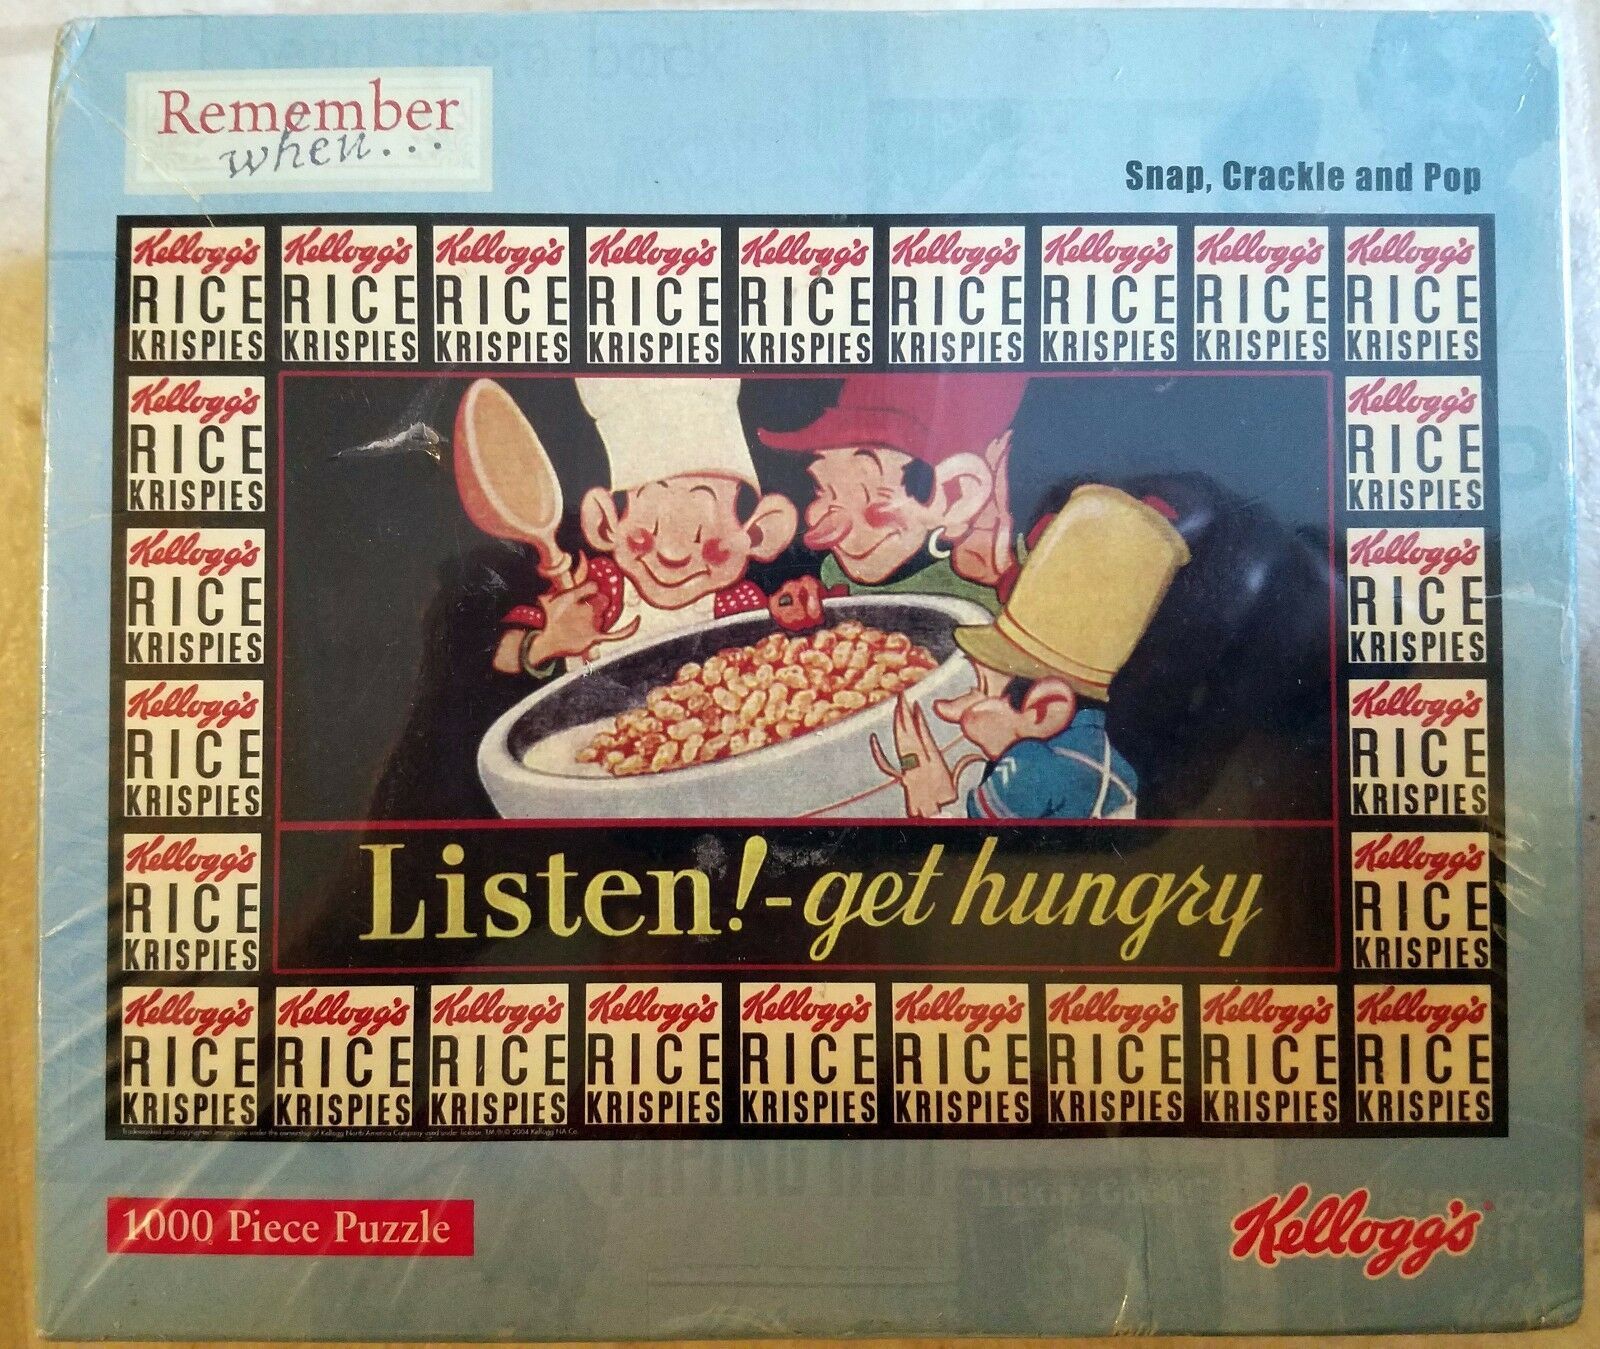 Primary image for KELLOGG'S RICE KRISPIES 1000 piece jigsaw puzzle SNAP CRACKLE AND POP 1940s ad